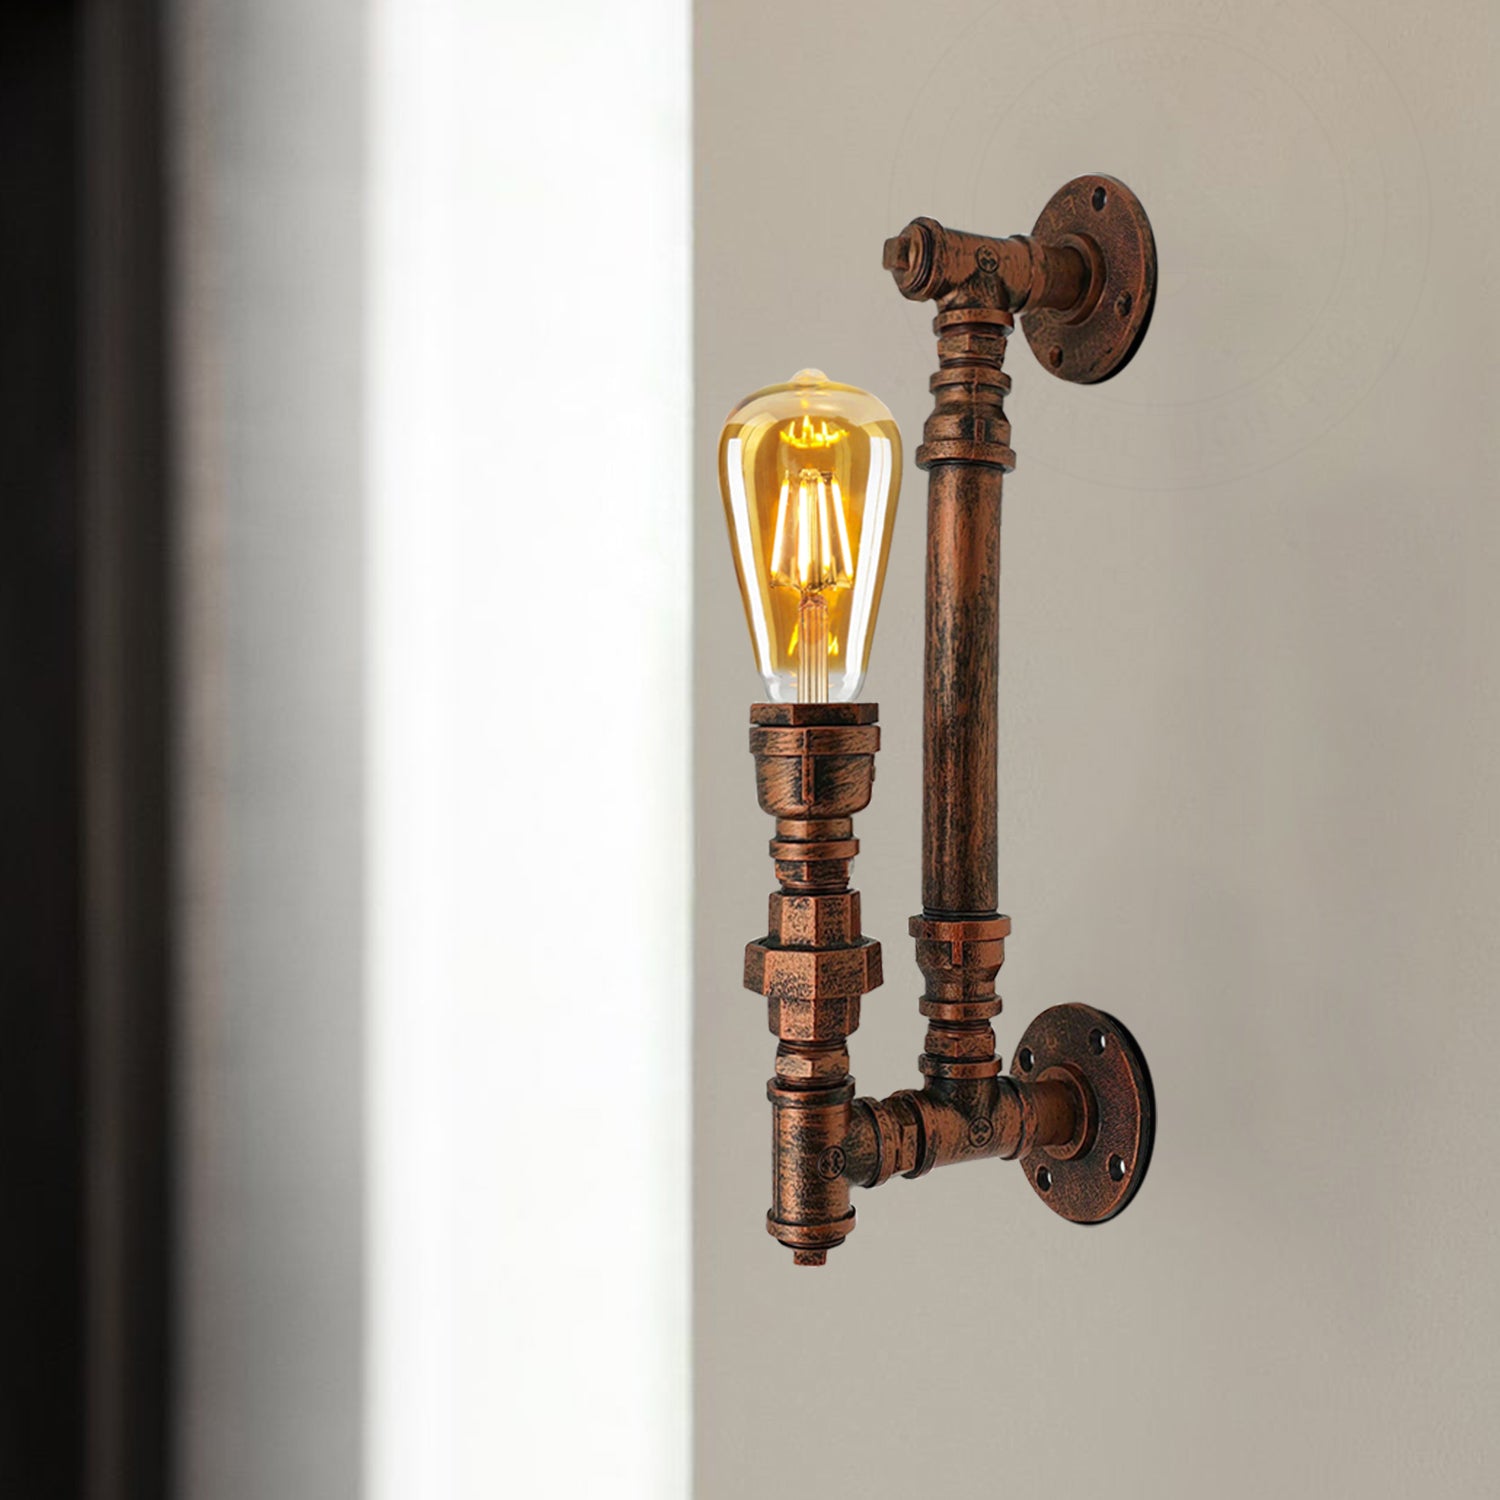 Rustic Red Steampunk Waterpipe Wall Sconce Light for hall ways.JPG